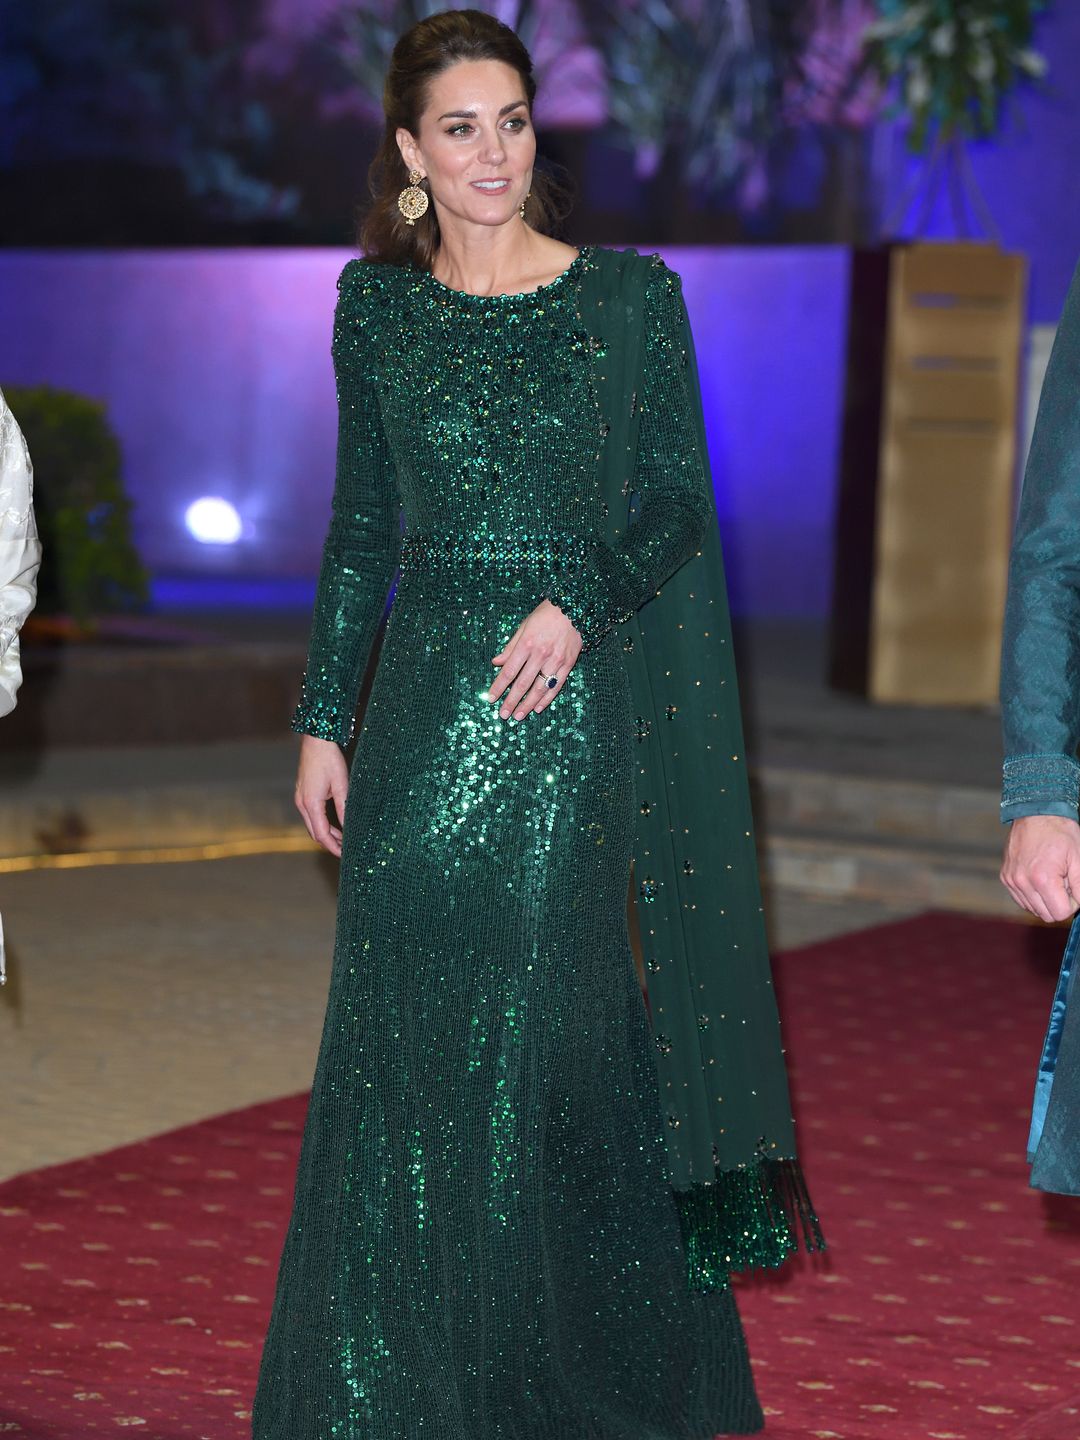 Catherine, Duchess of Cambridge attends a special reception hosted by the British High Commissioner to Pakistan at the iconic Pakistan National Monument during their Royal Tour of Pakistan wearing Jenny Packham